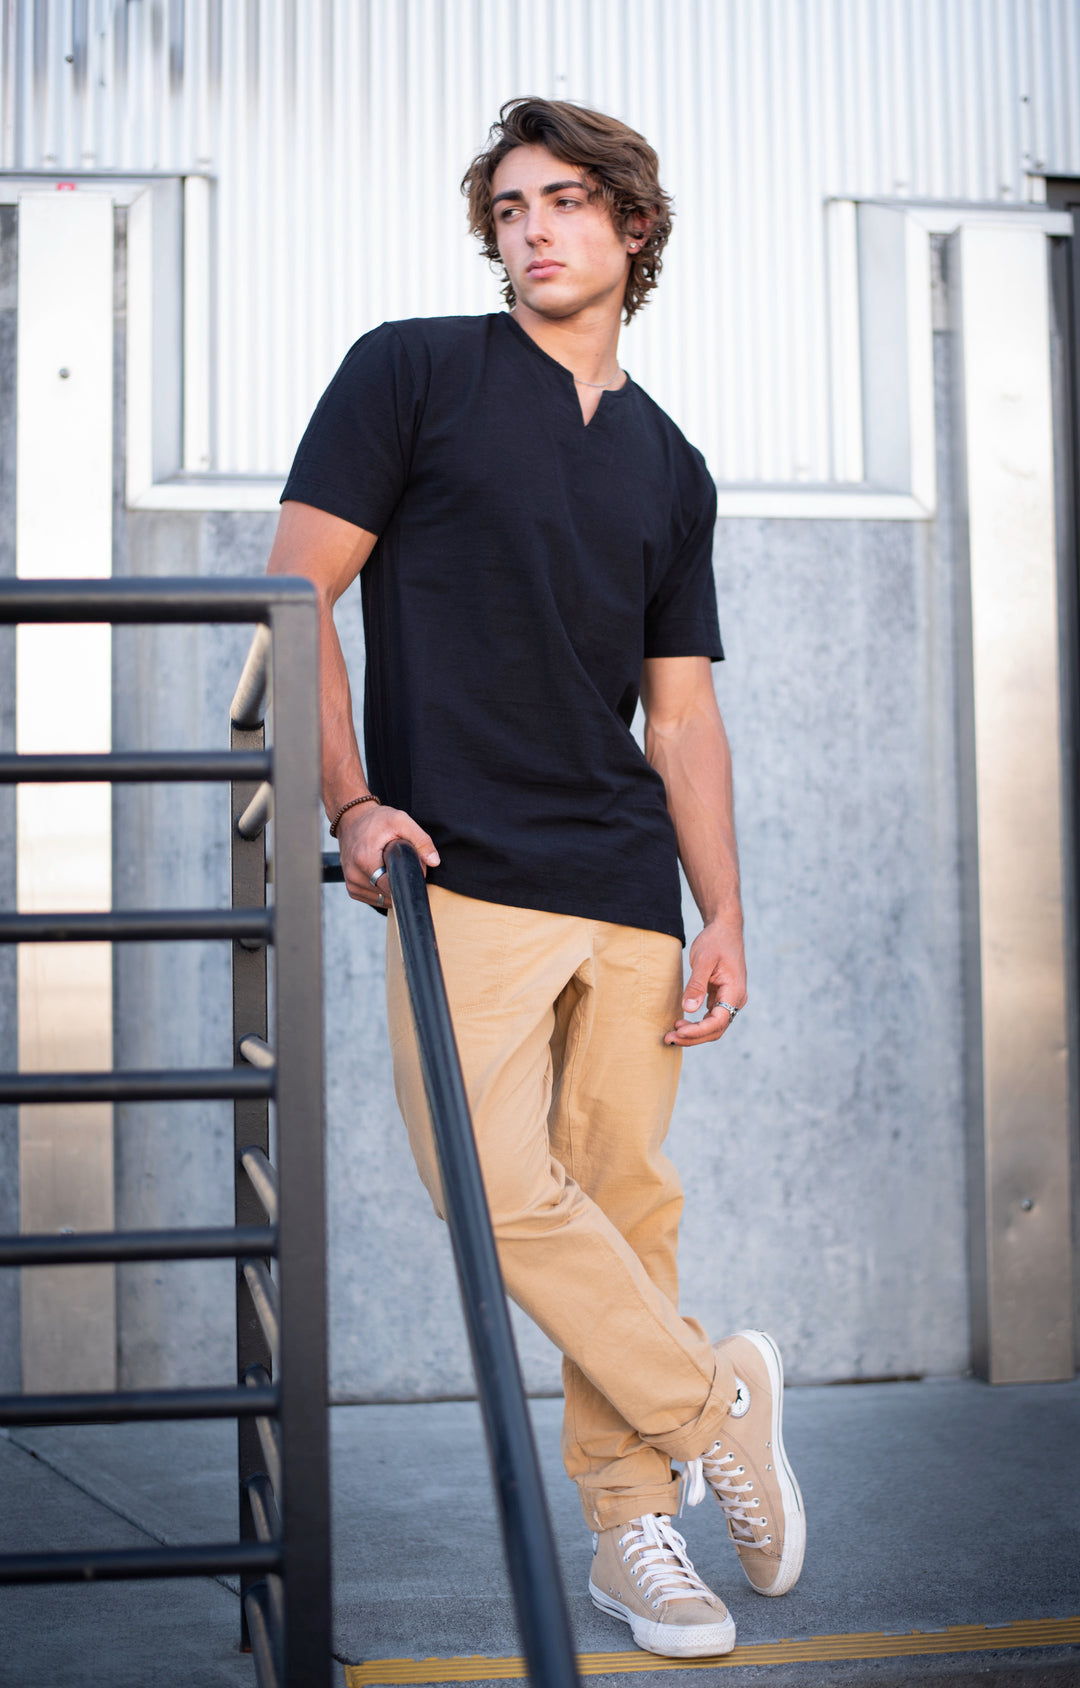 Male model is wearing black shirt and tan pants with laced sneakers. He leans agains a railing in a stairway.